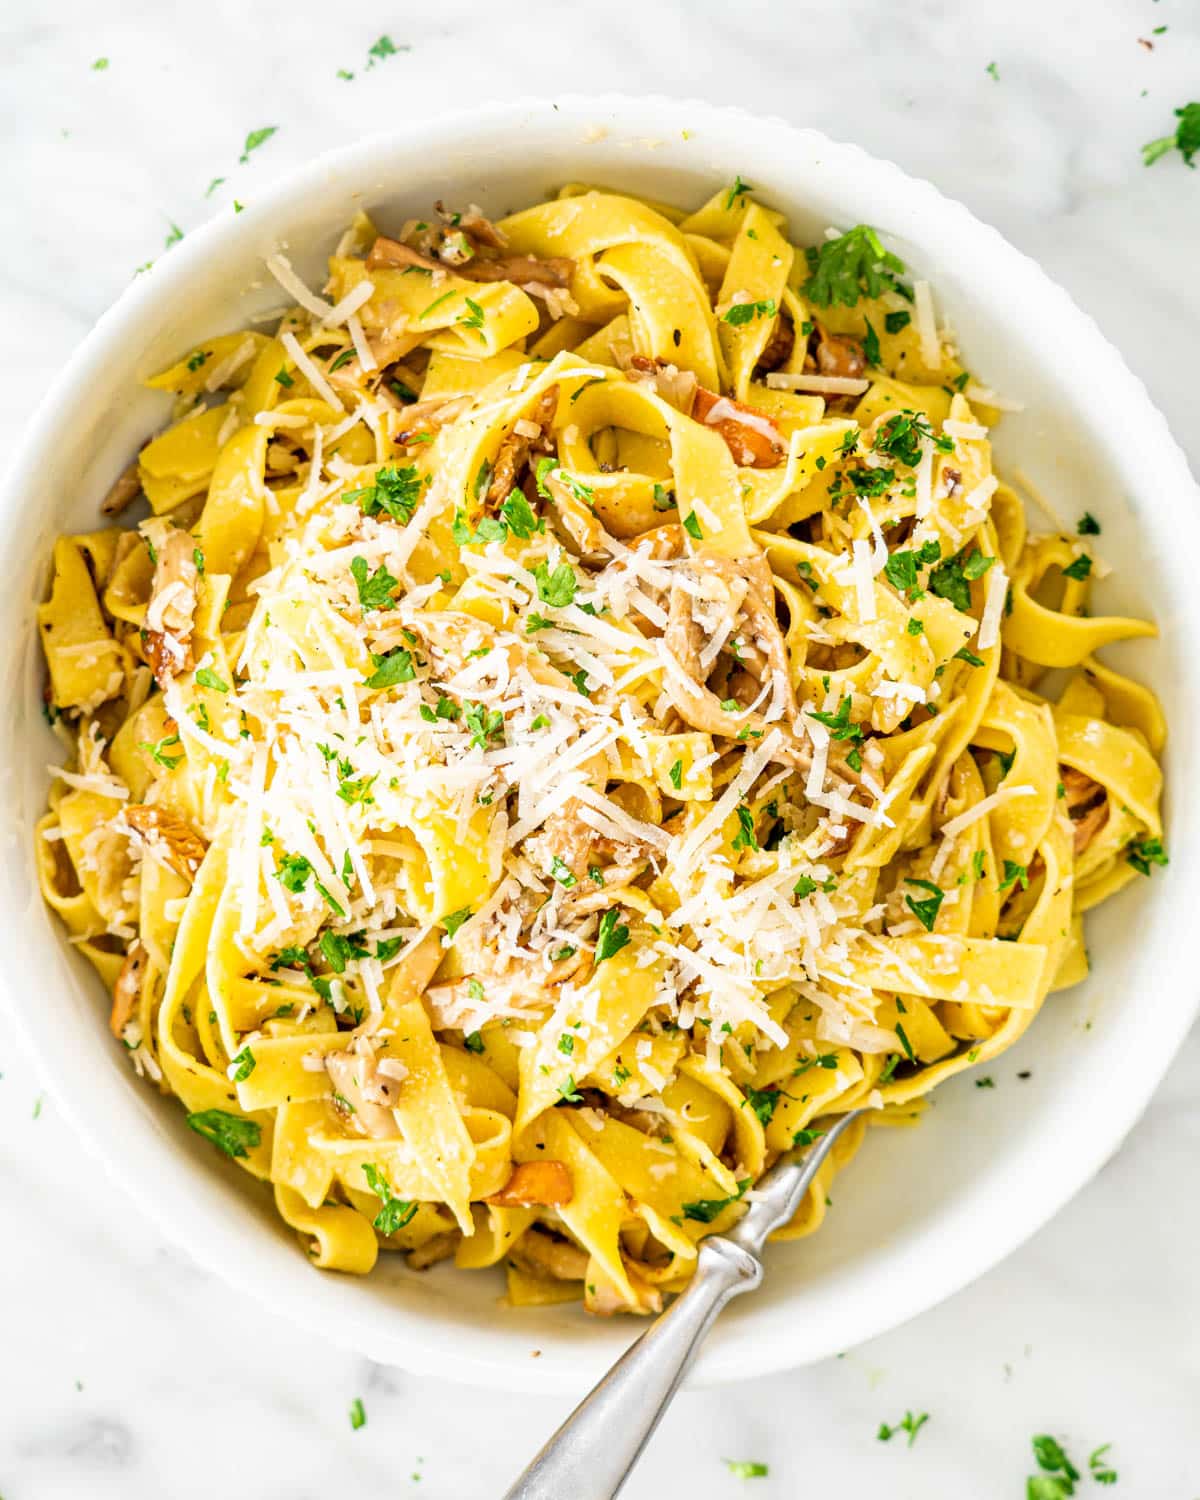 Chanterelle Mushrooms with Tagliatelle in a white bowl